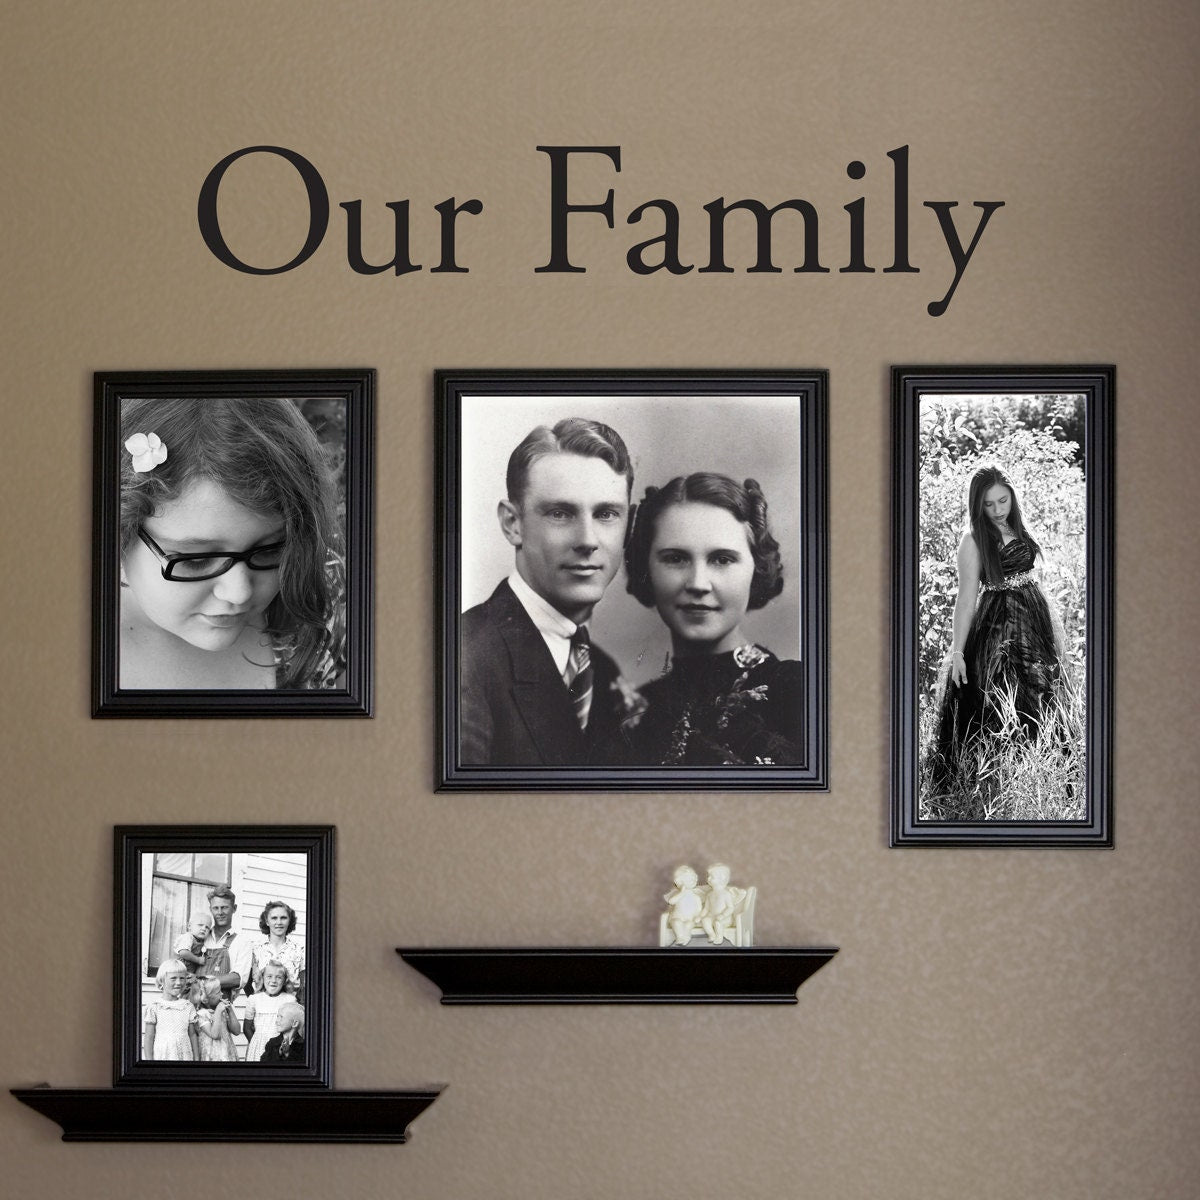 Our Family Wall Decal - Photo Wall Quote - Family Picture Wall Decal